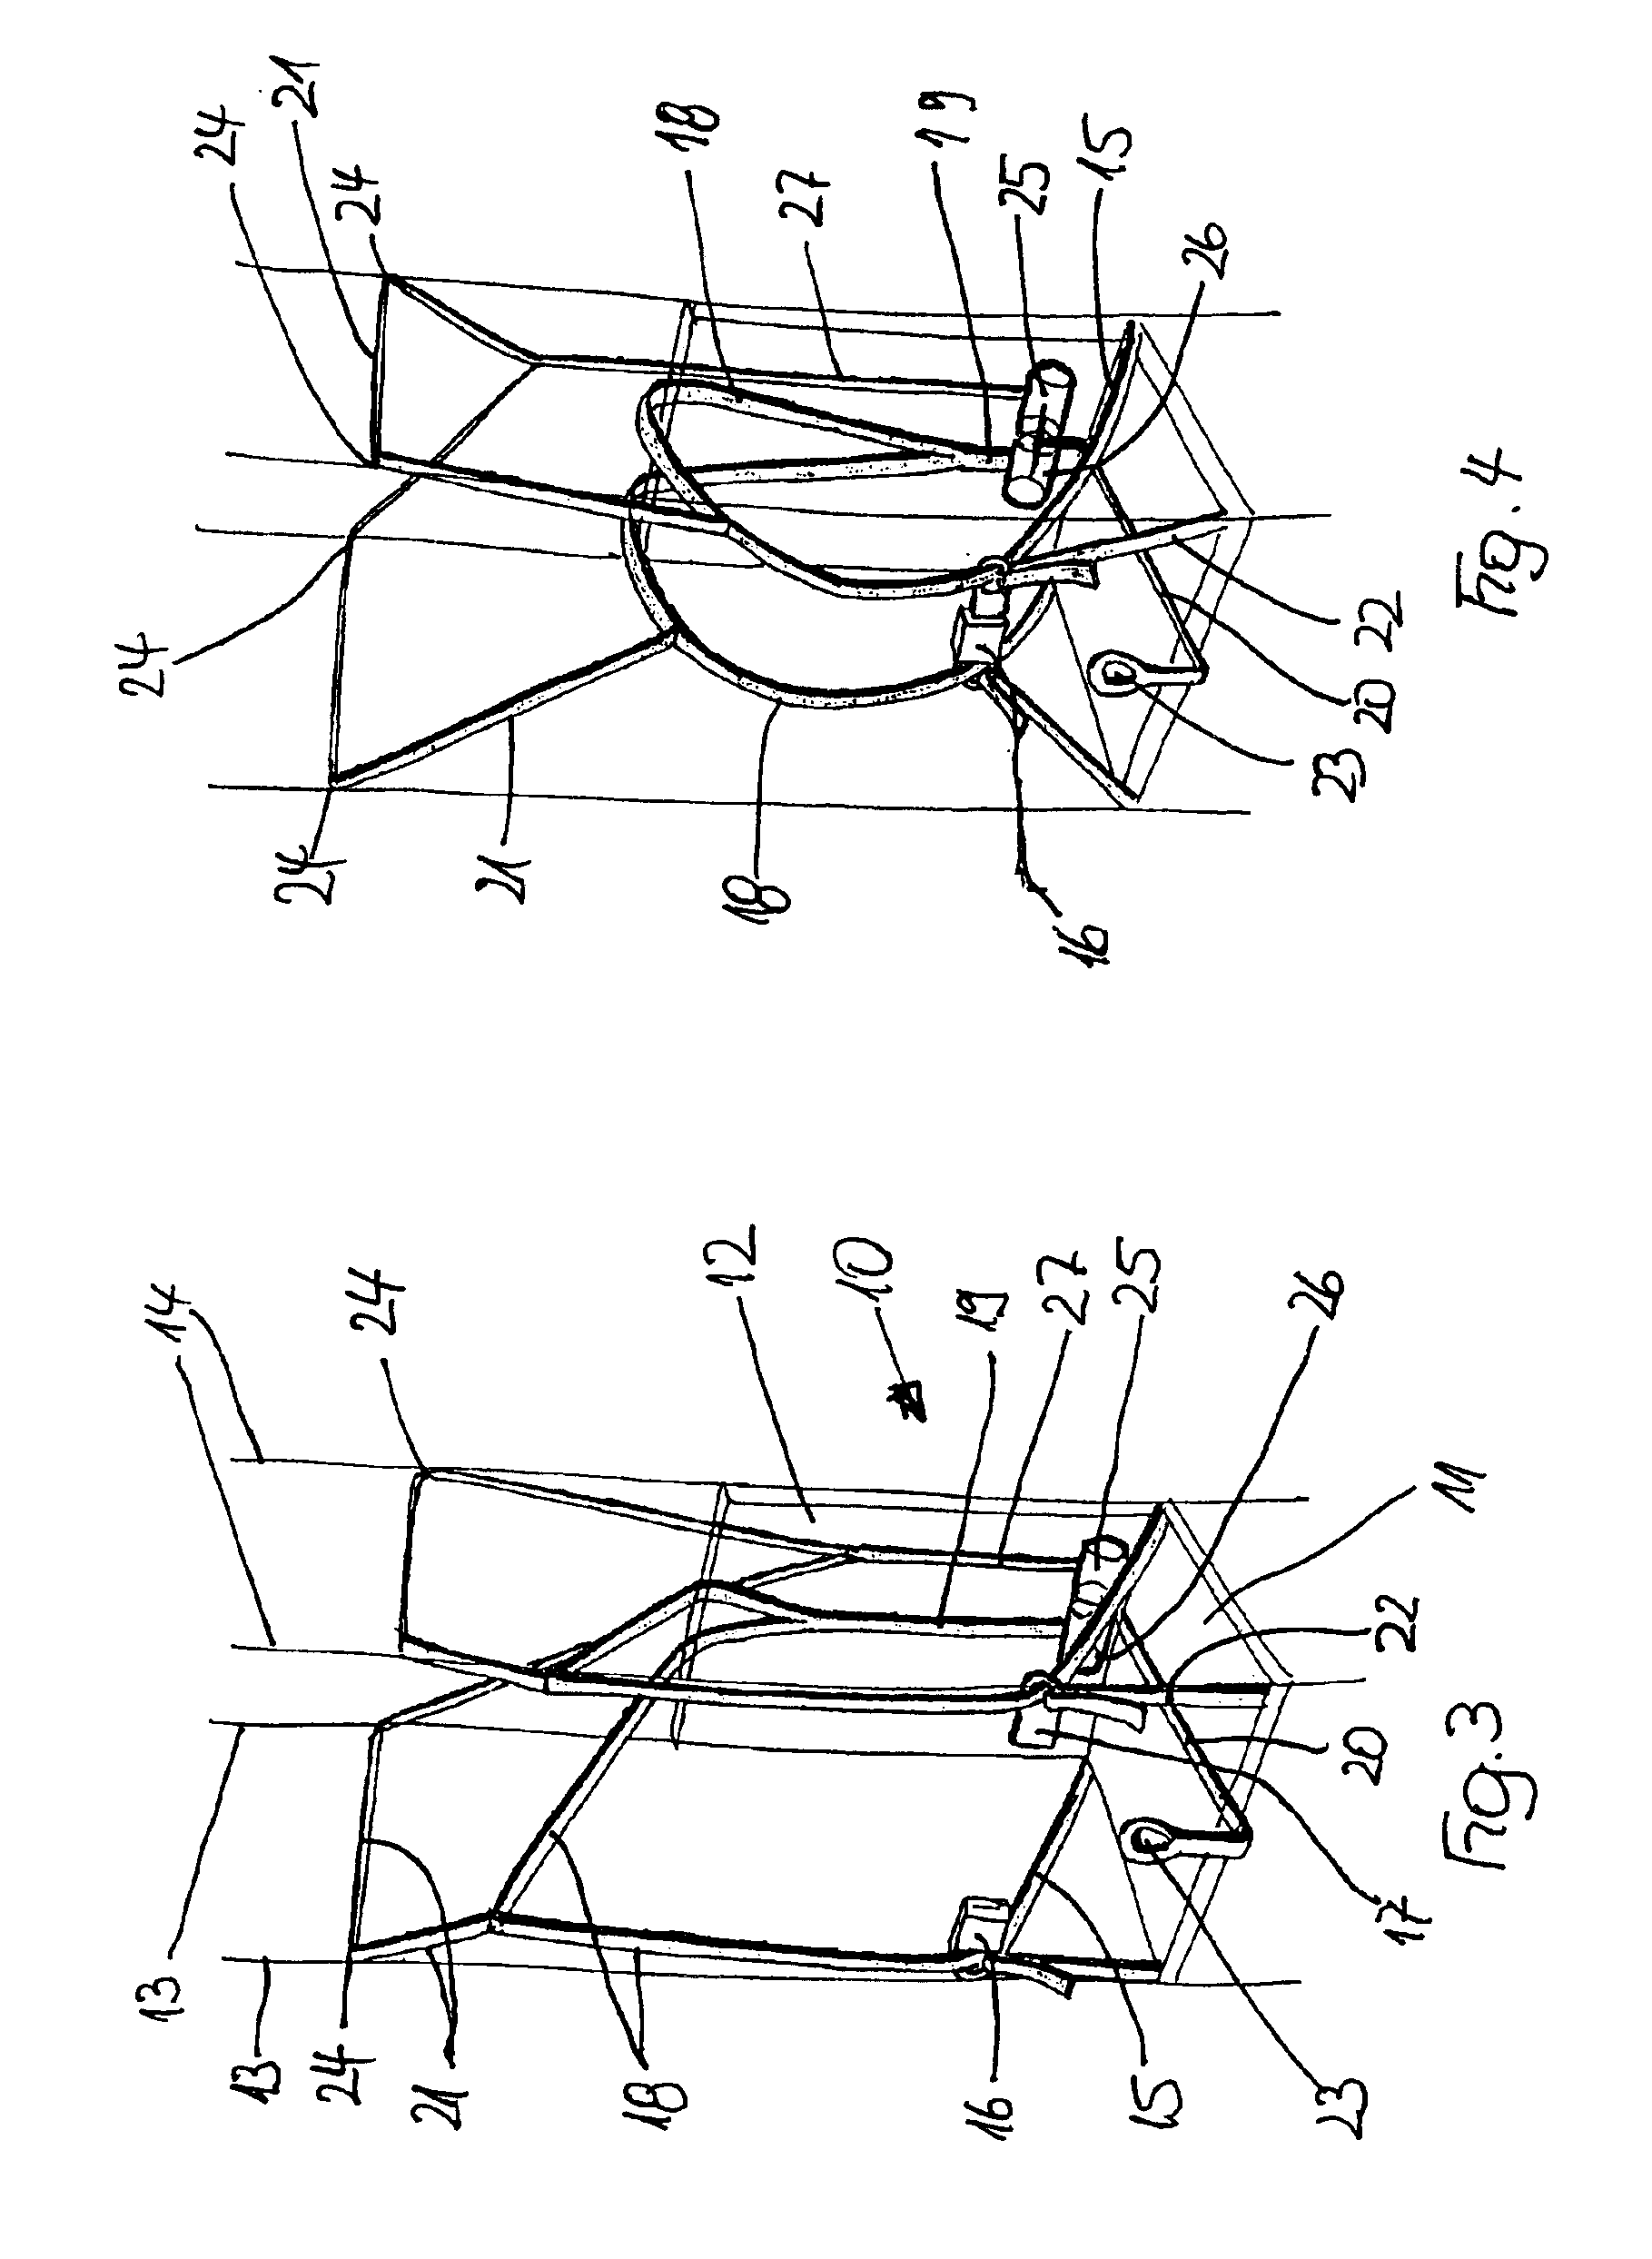 Safety seat with device for automatically putting a belt on and taking it off